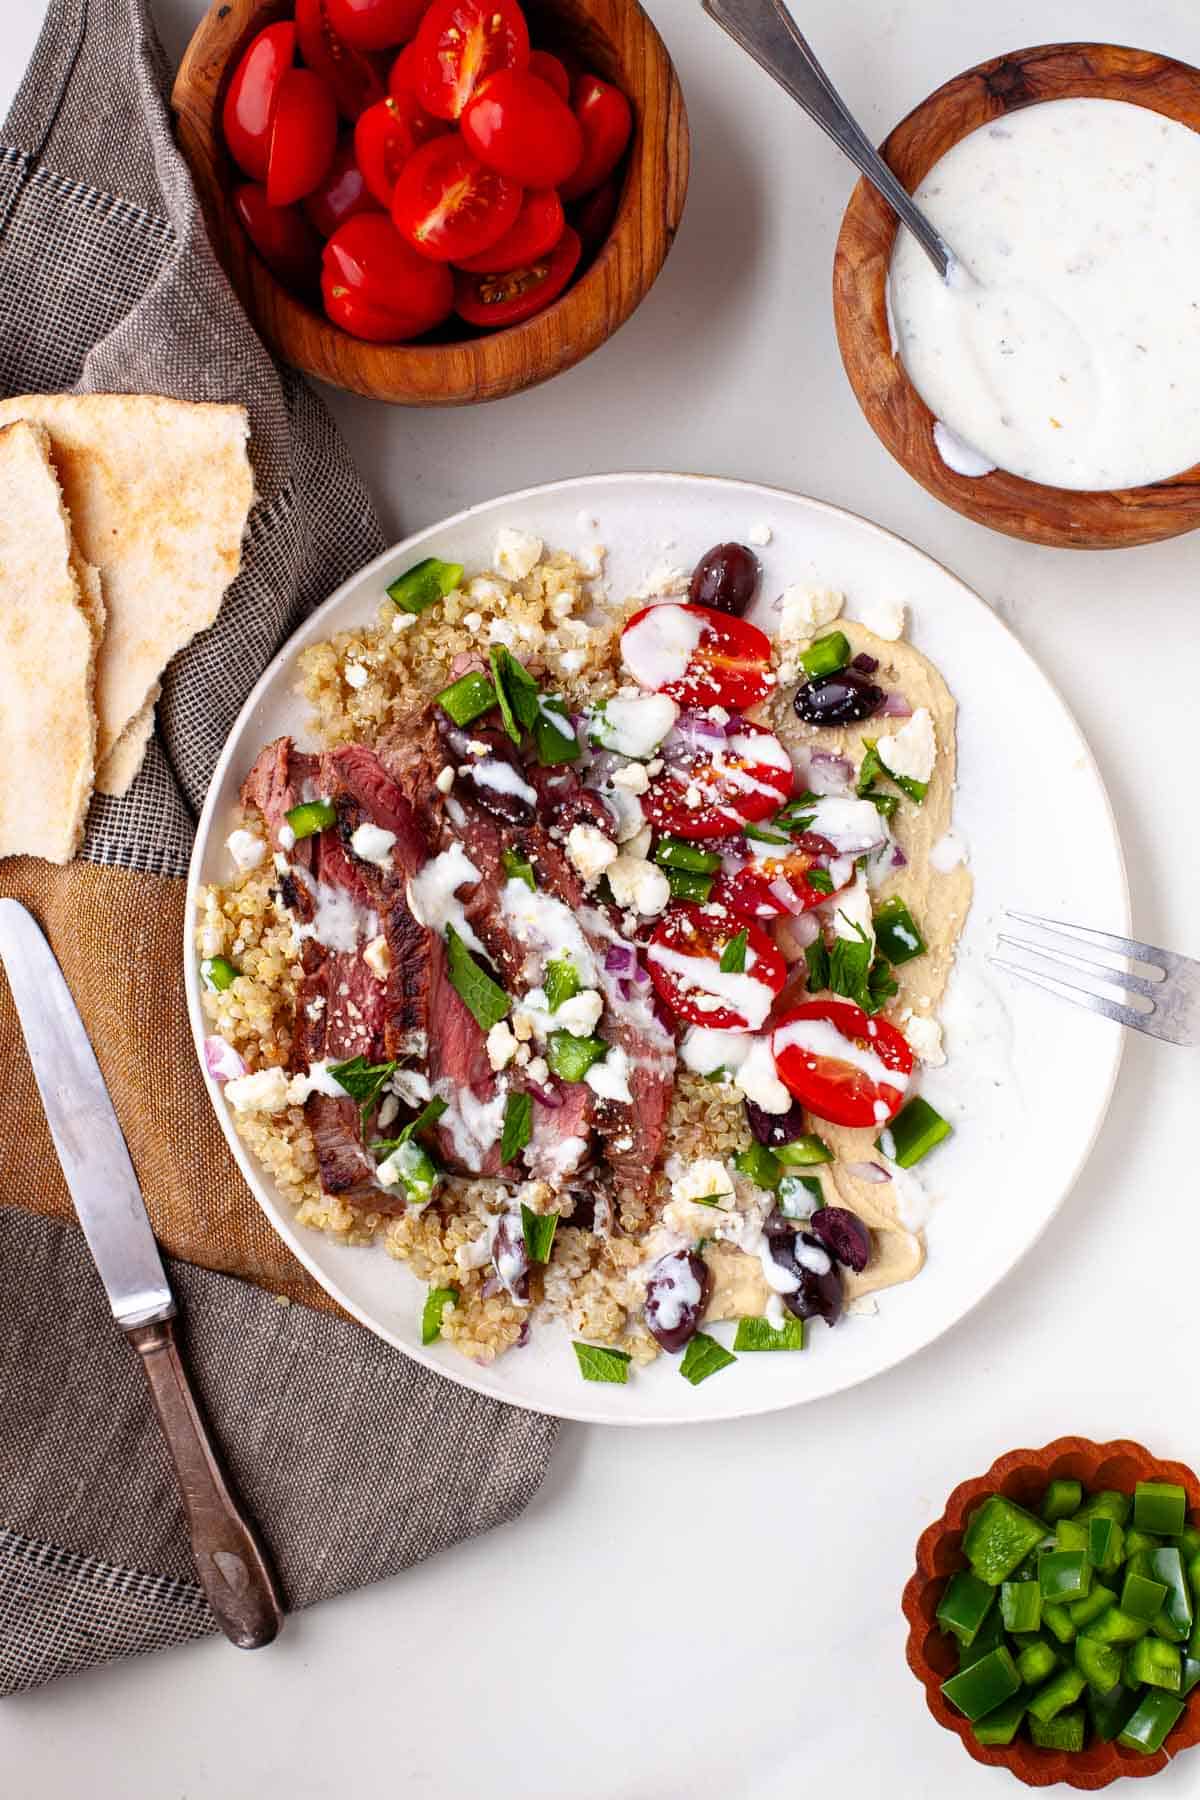 steak grain bowl surrounded by cherry tomatoes, herb yogurt dressing, chopped bell peppers, and pita bread.